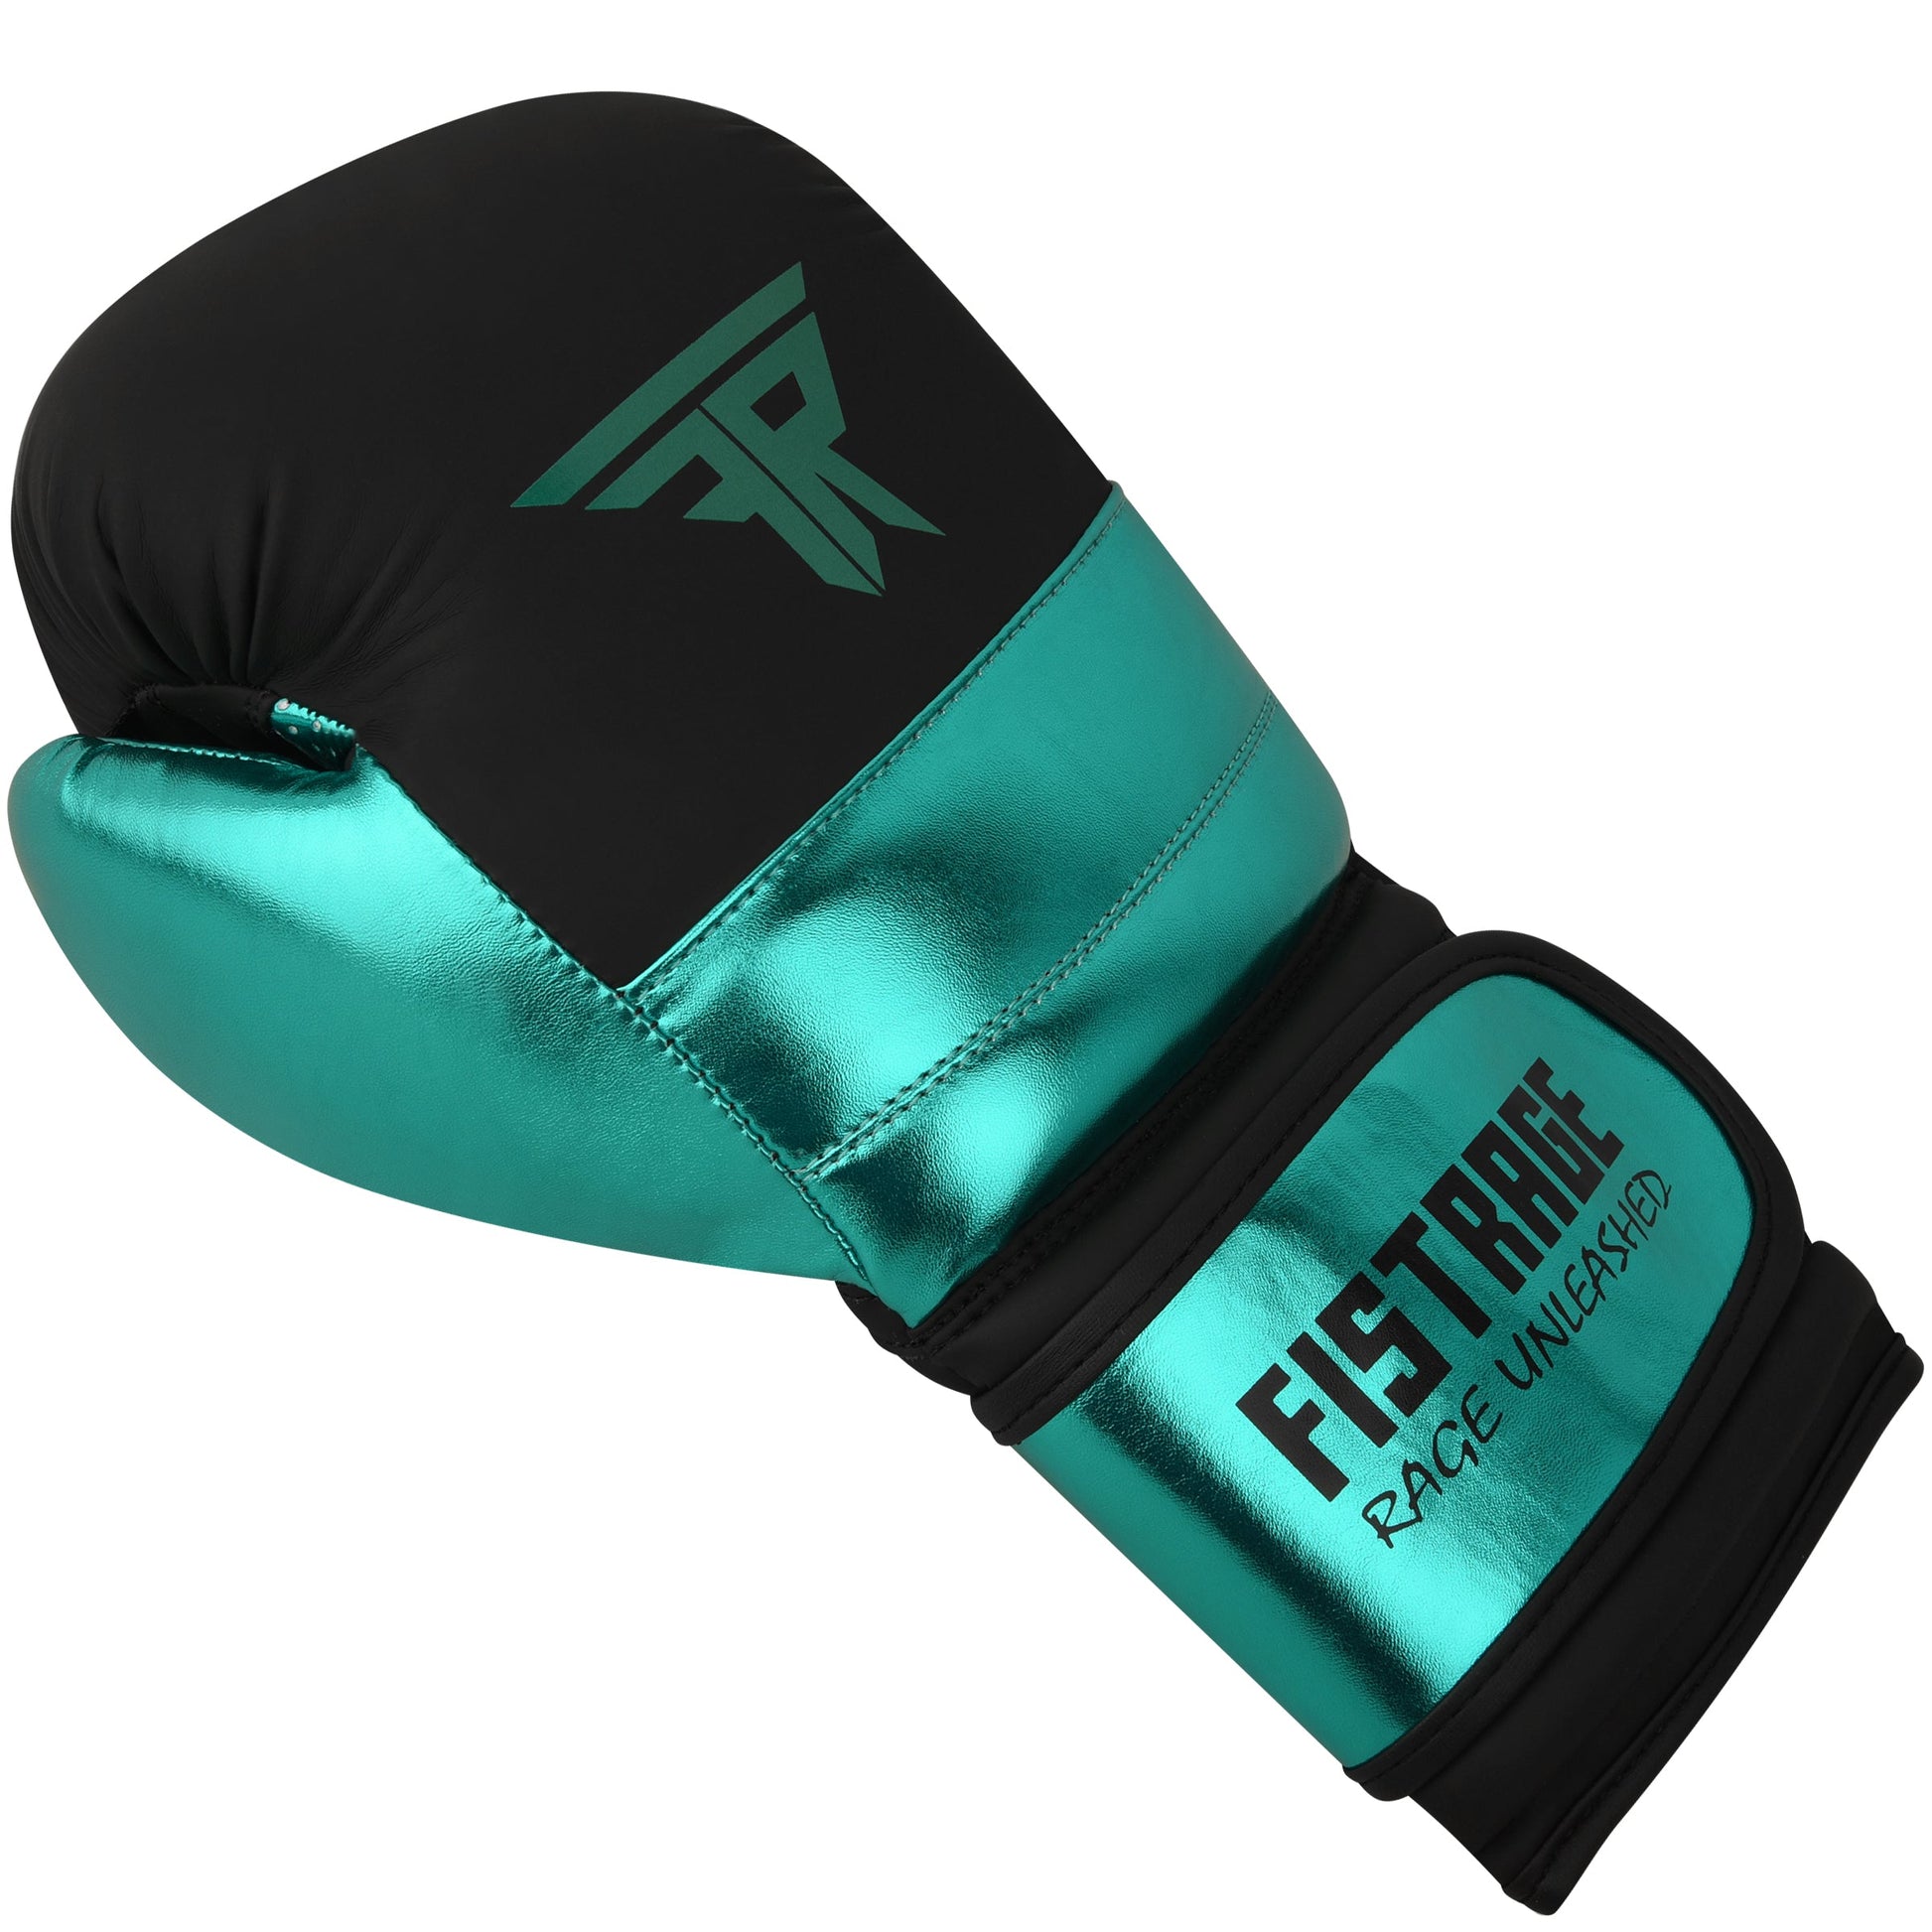 boxing gloves, leather boxing gloves, fistrage boxing gloves, sparring gloves, training gloves,